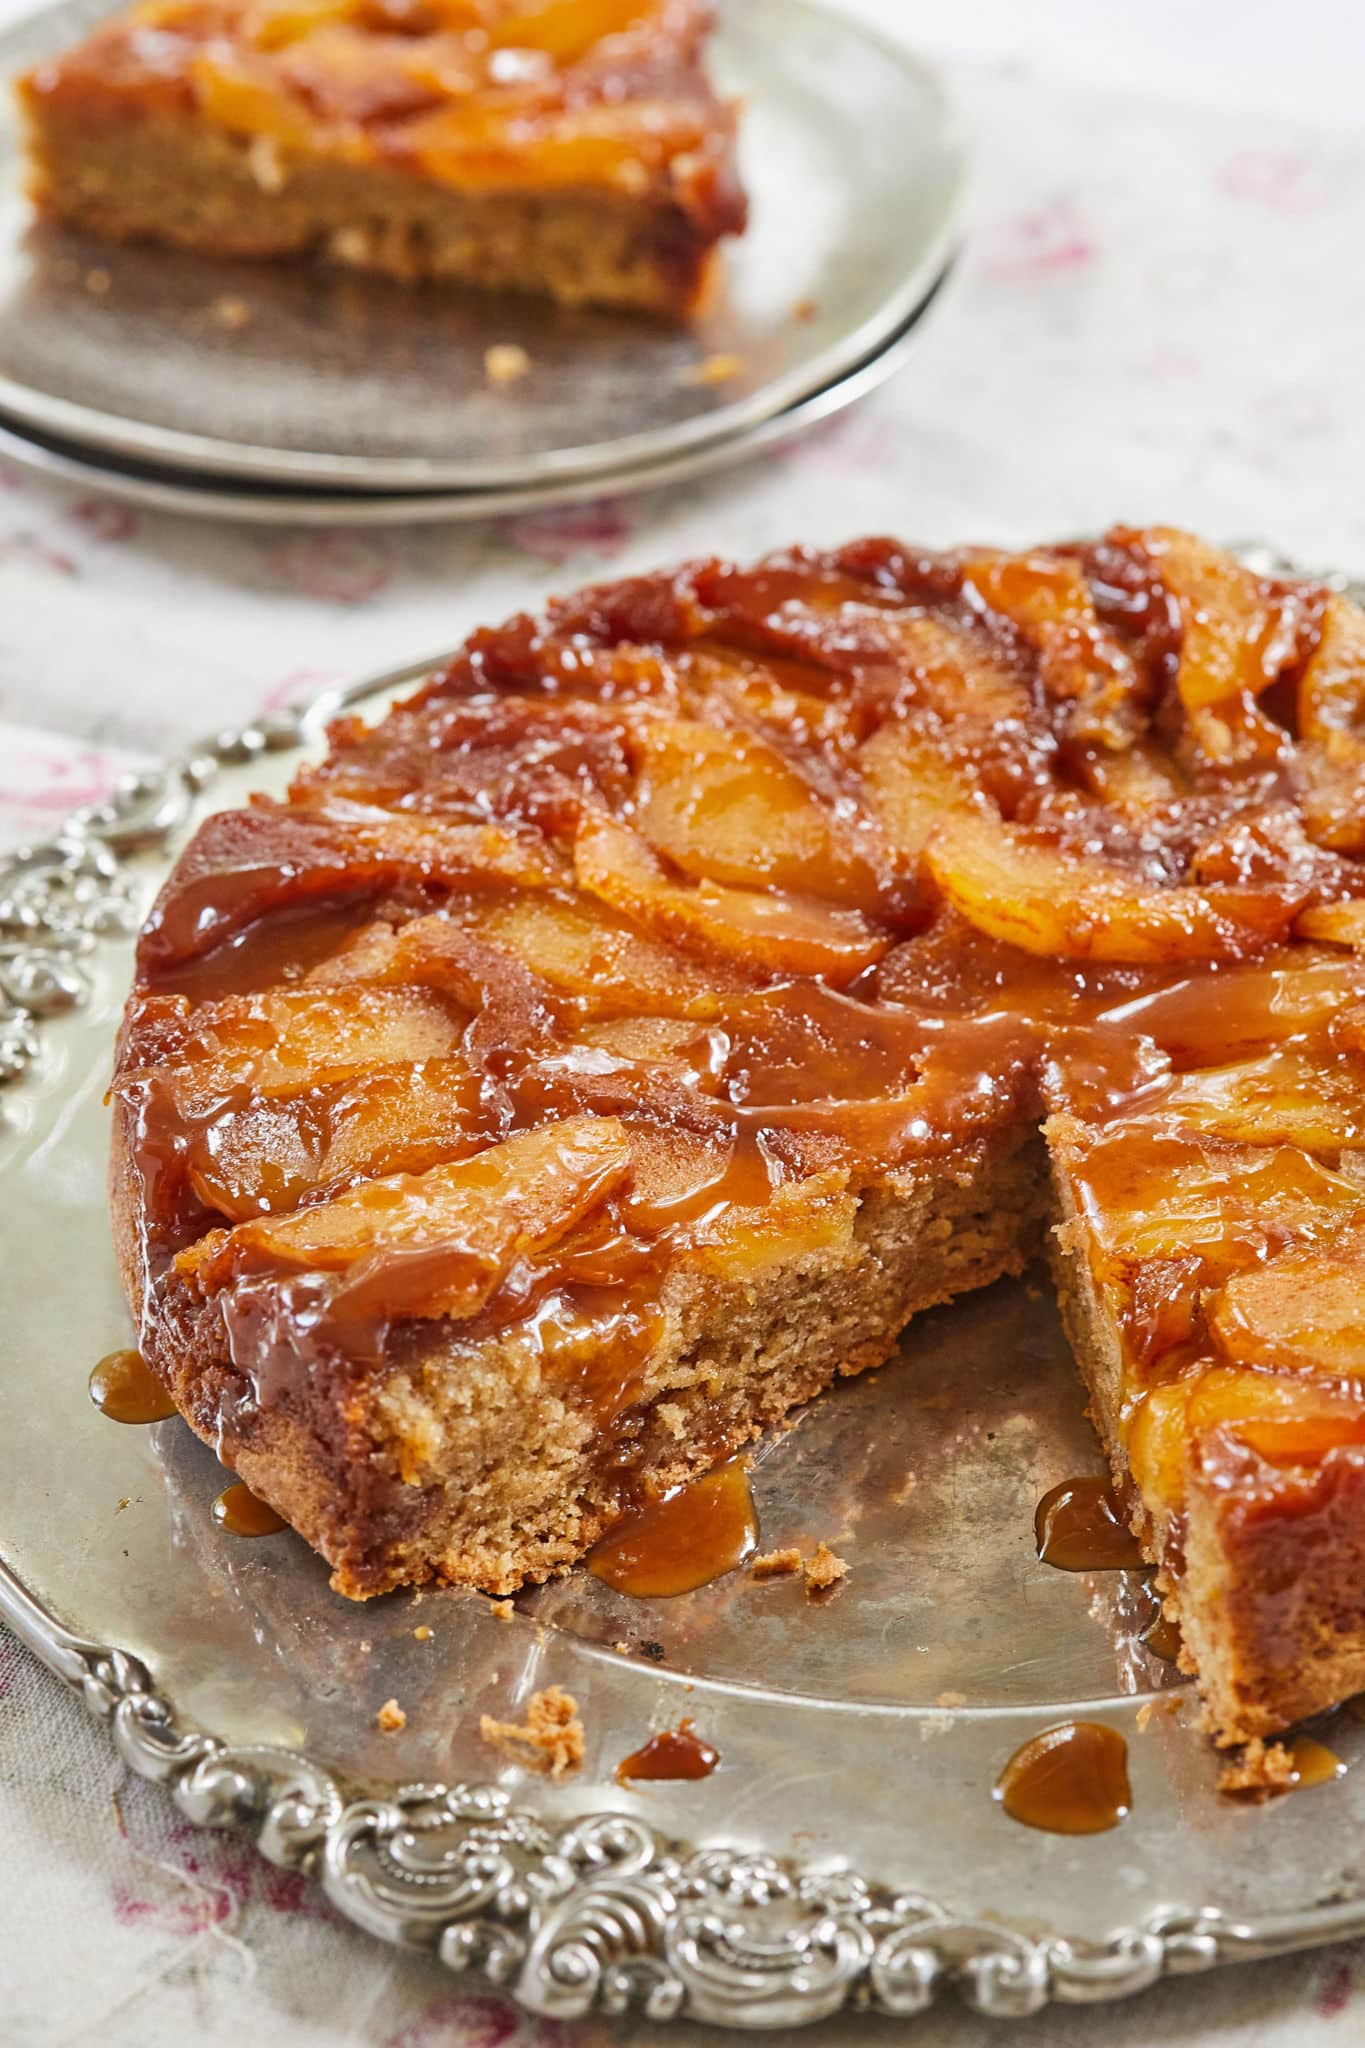 One of the prefect Fall Recipes is Decadent Caramel Apple Upside Down Cake, which is baked golden brown and served on a big platter with one slice cut off and served on a small plate. It's covered with sticky glossy caramel sauce, underneath is slices of tender baked apples, with soft moist cake at the bottom. 